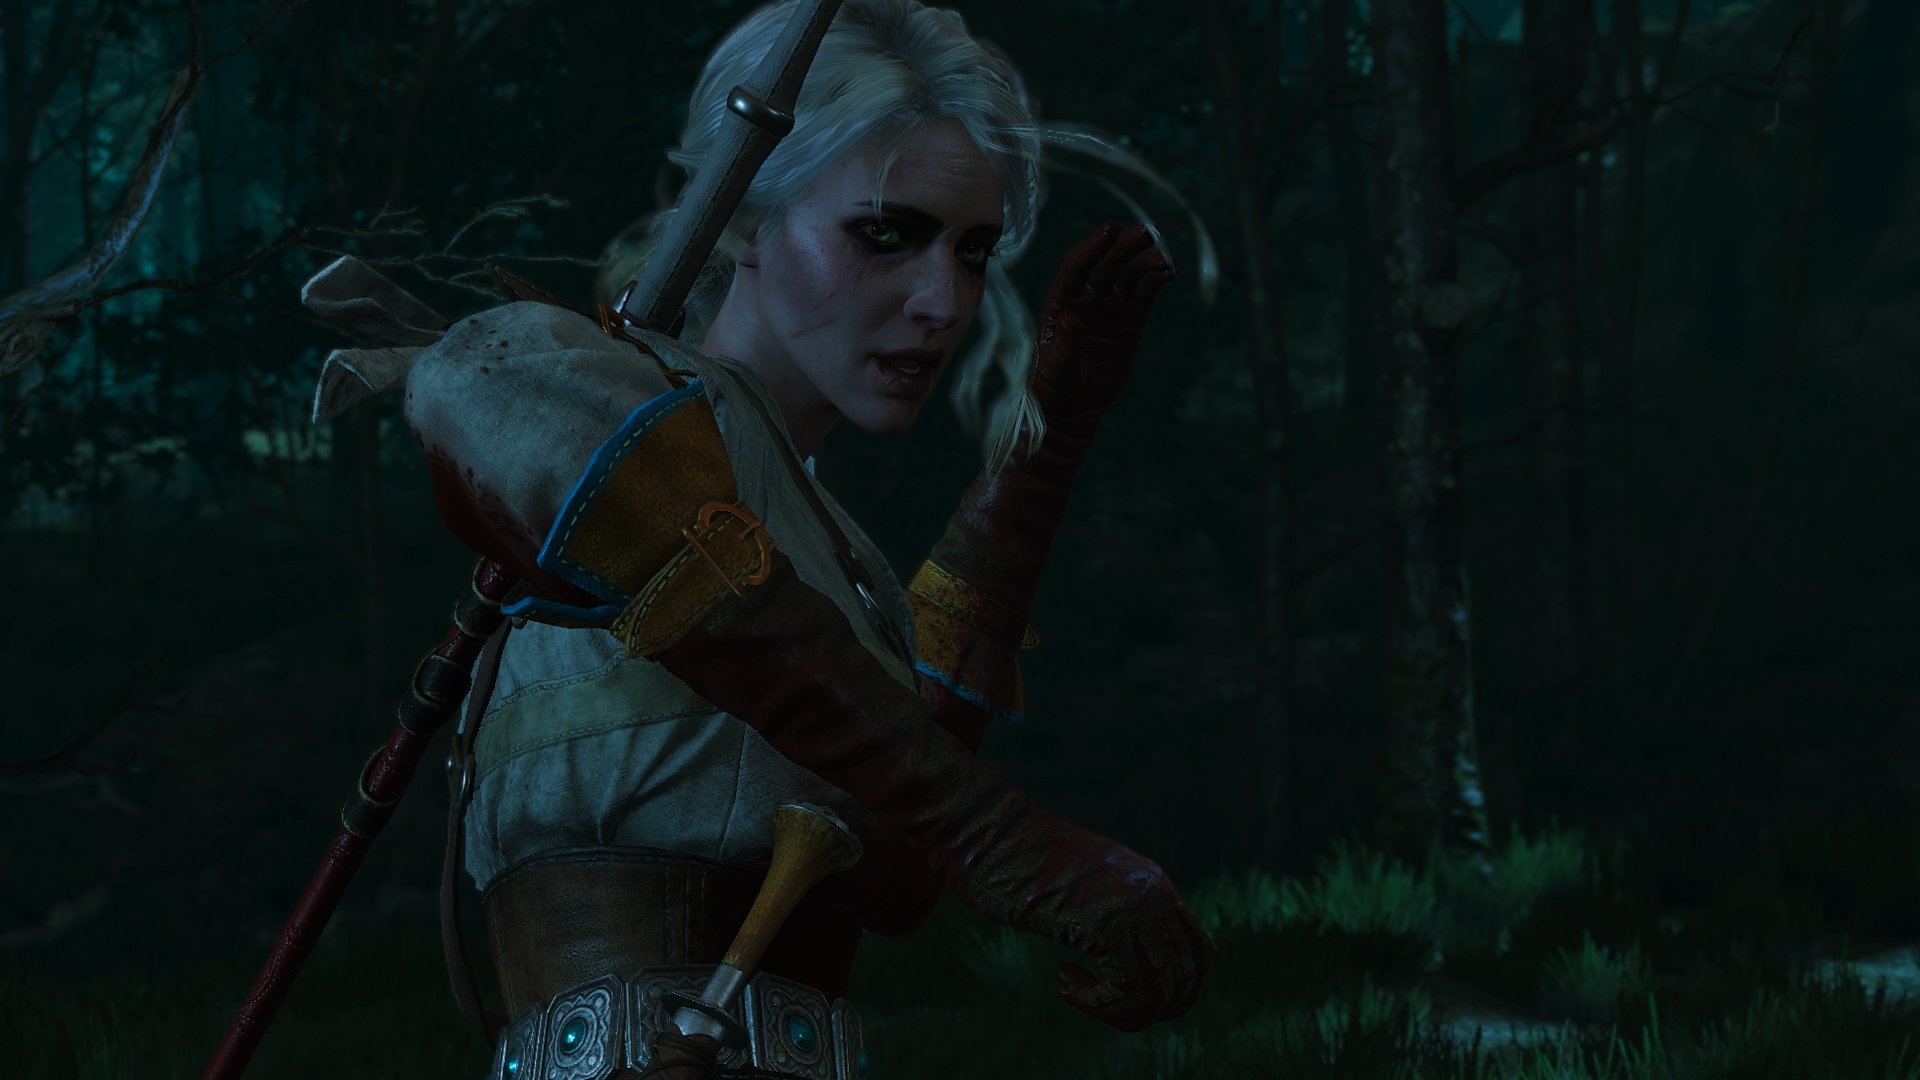 Download full hd 1920x1080 The Witcher 3: Wild Hunt desktop background ID:18076 for free